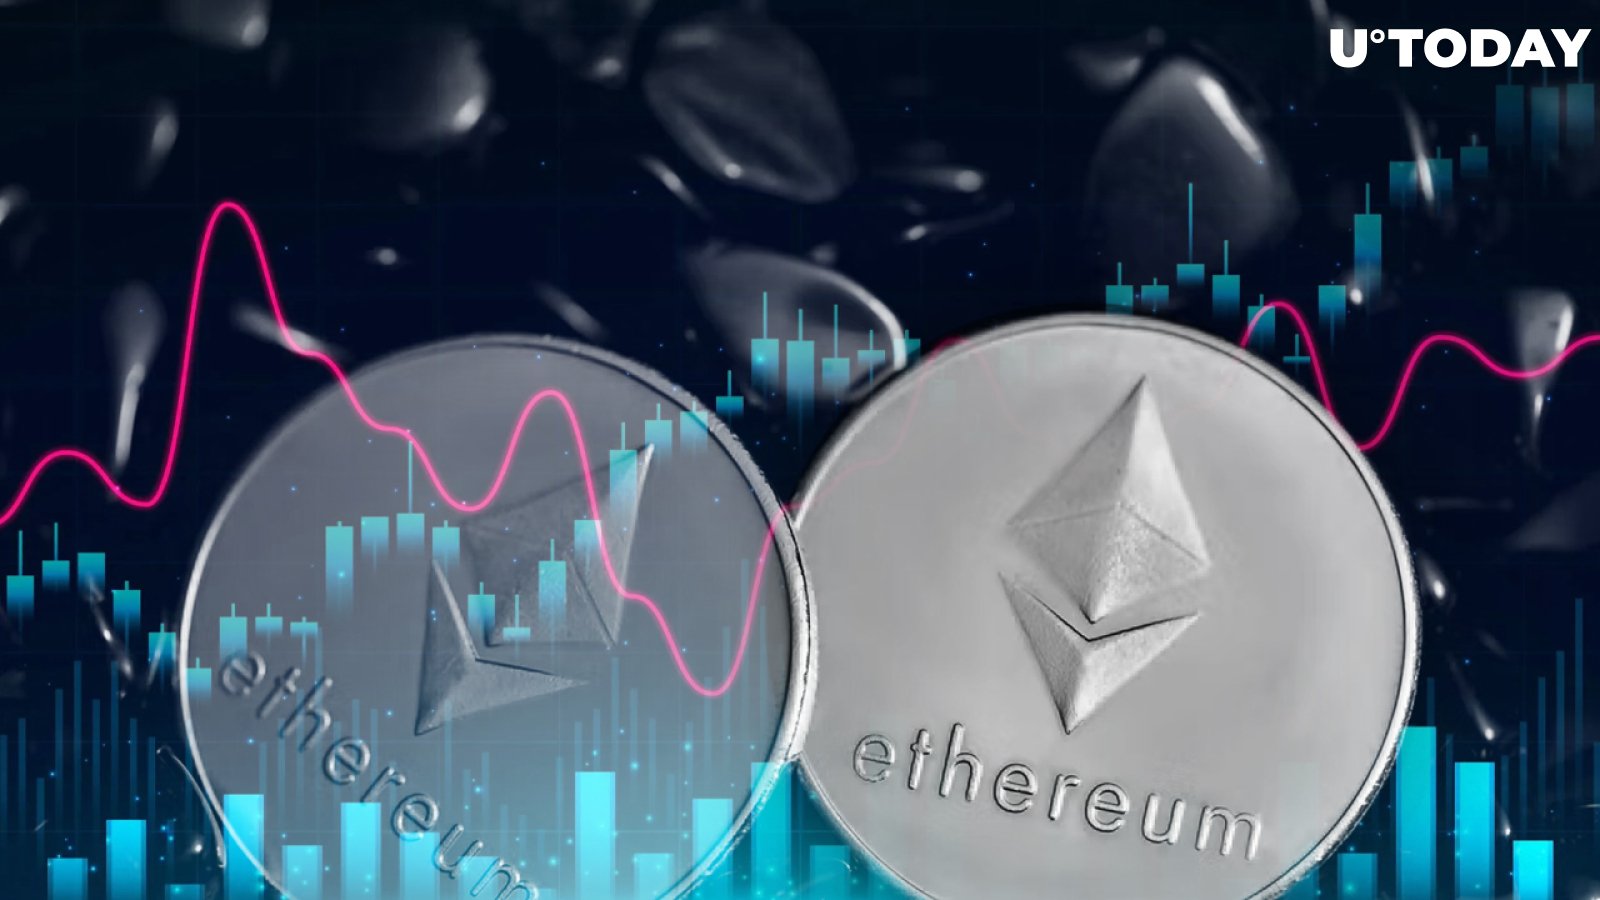 Ethereum's Price Returns Toward $1,800 as This Metric Indicates Next Direction of Trend